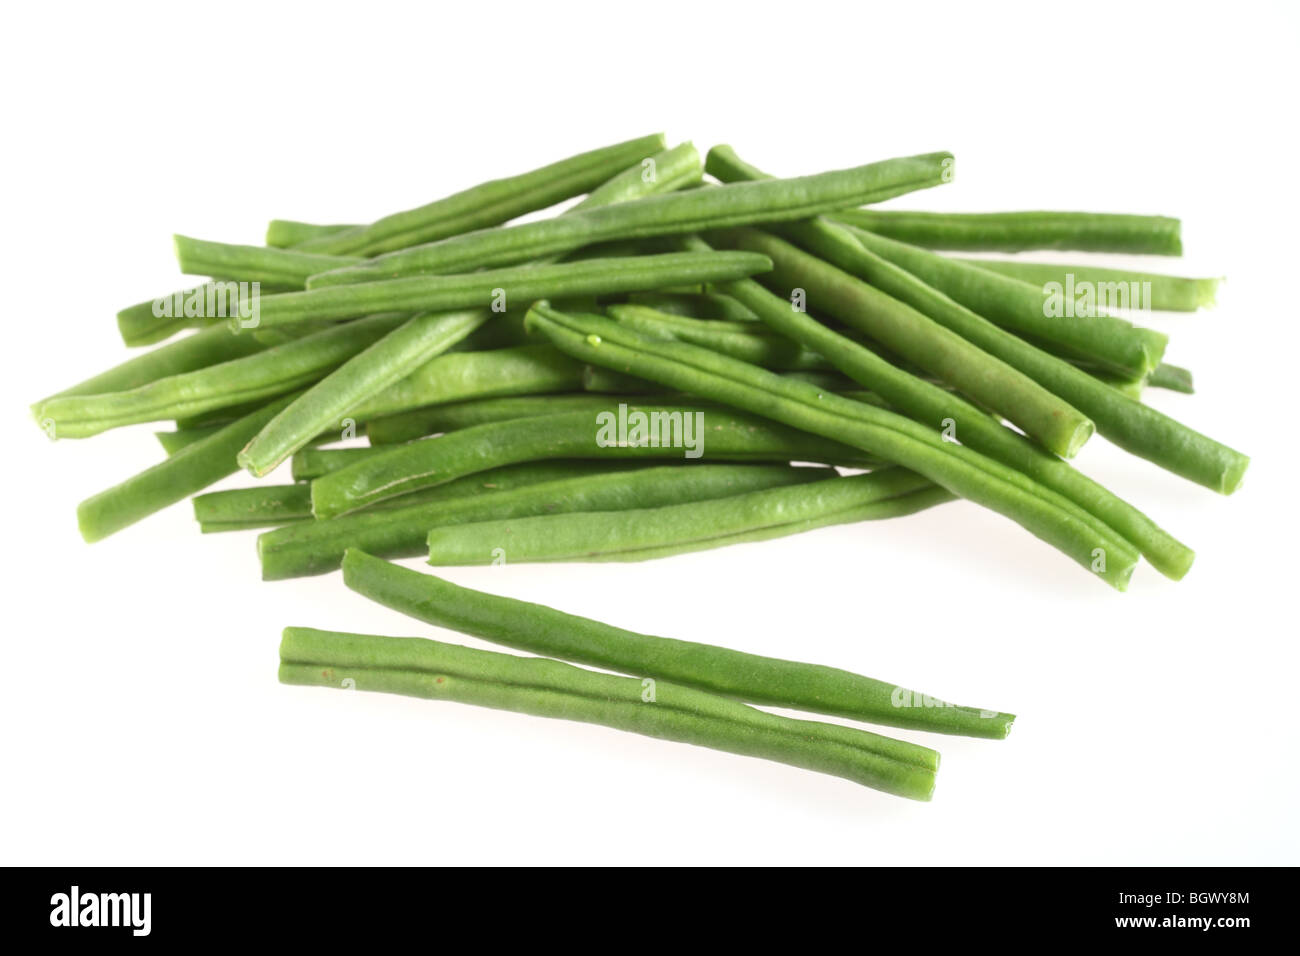 A heap of tender green haricot beans over a white background Stock Photo